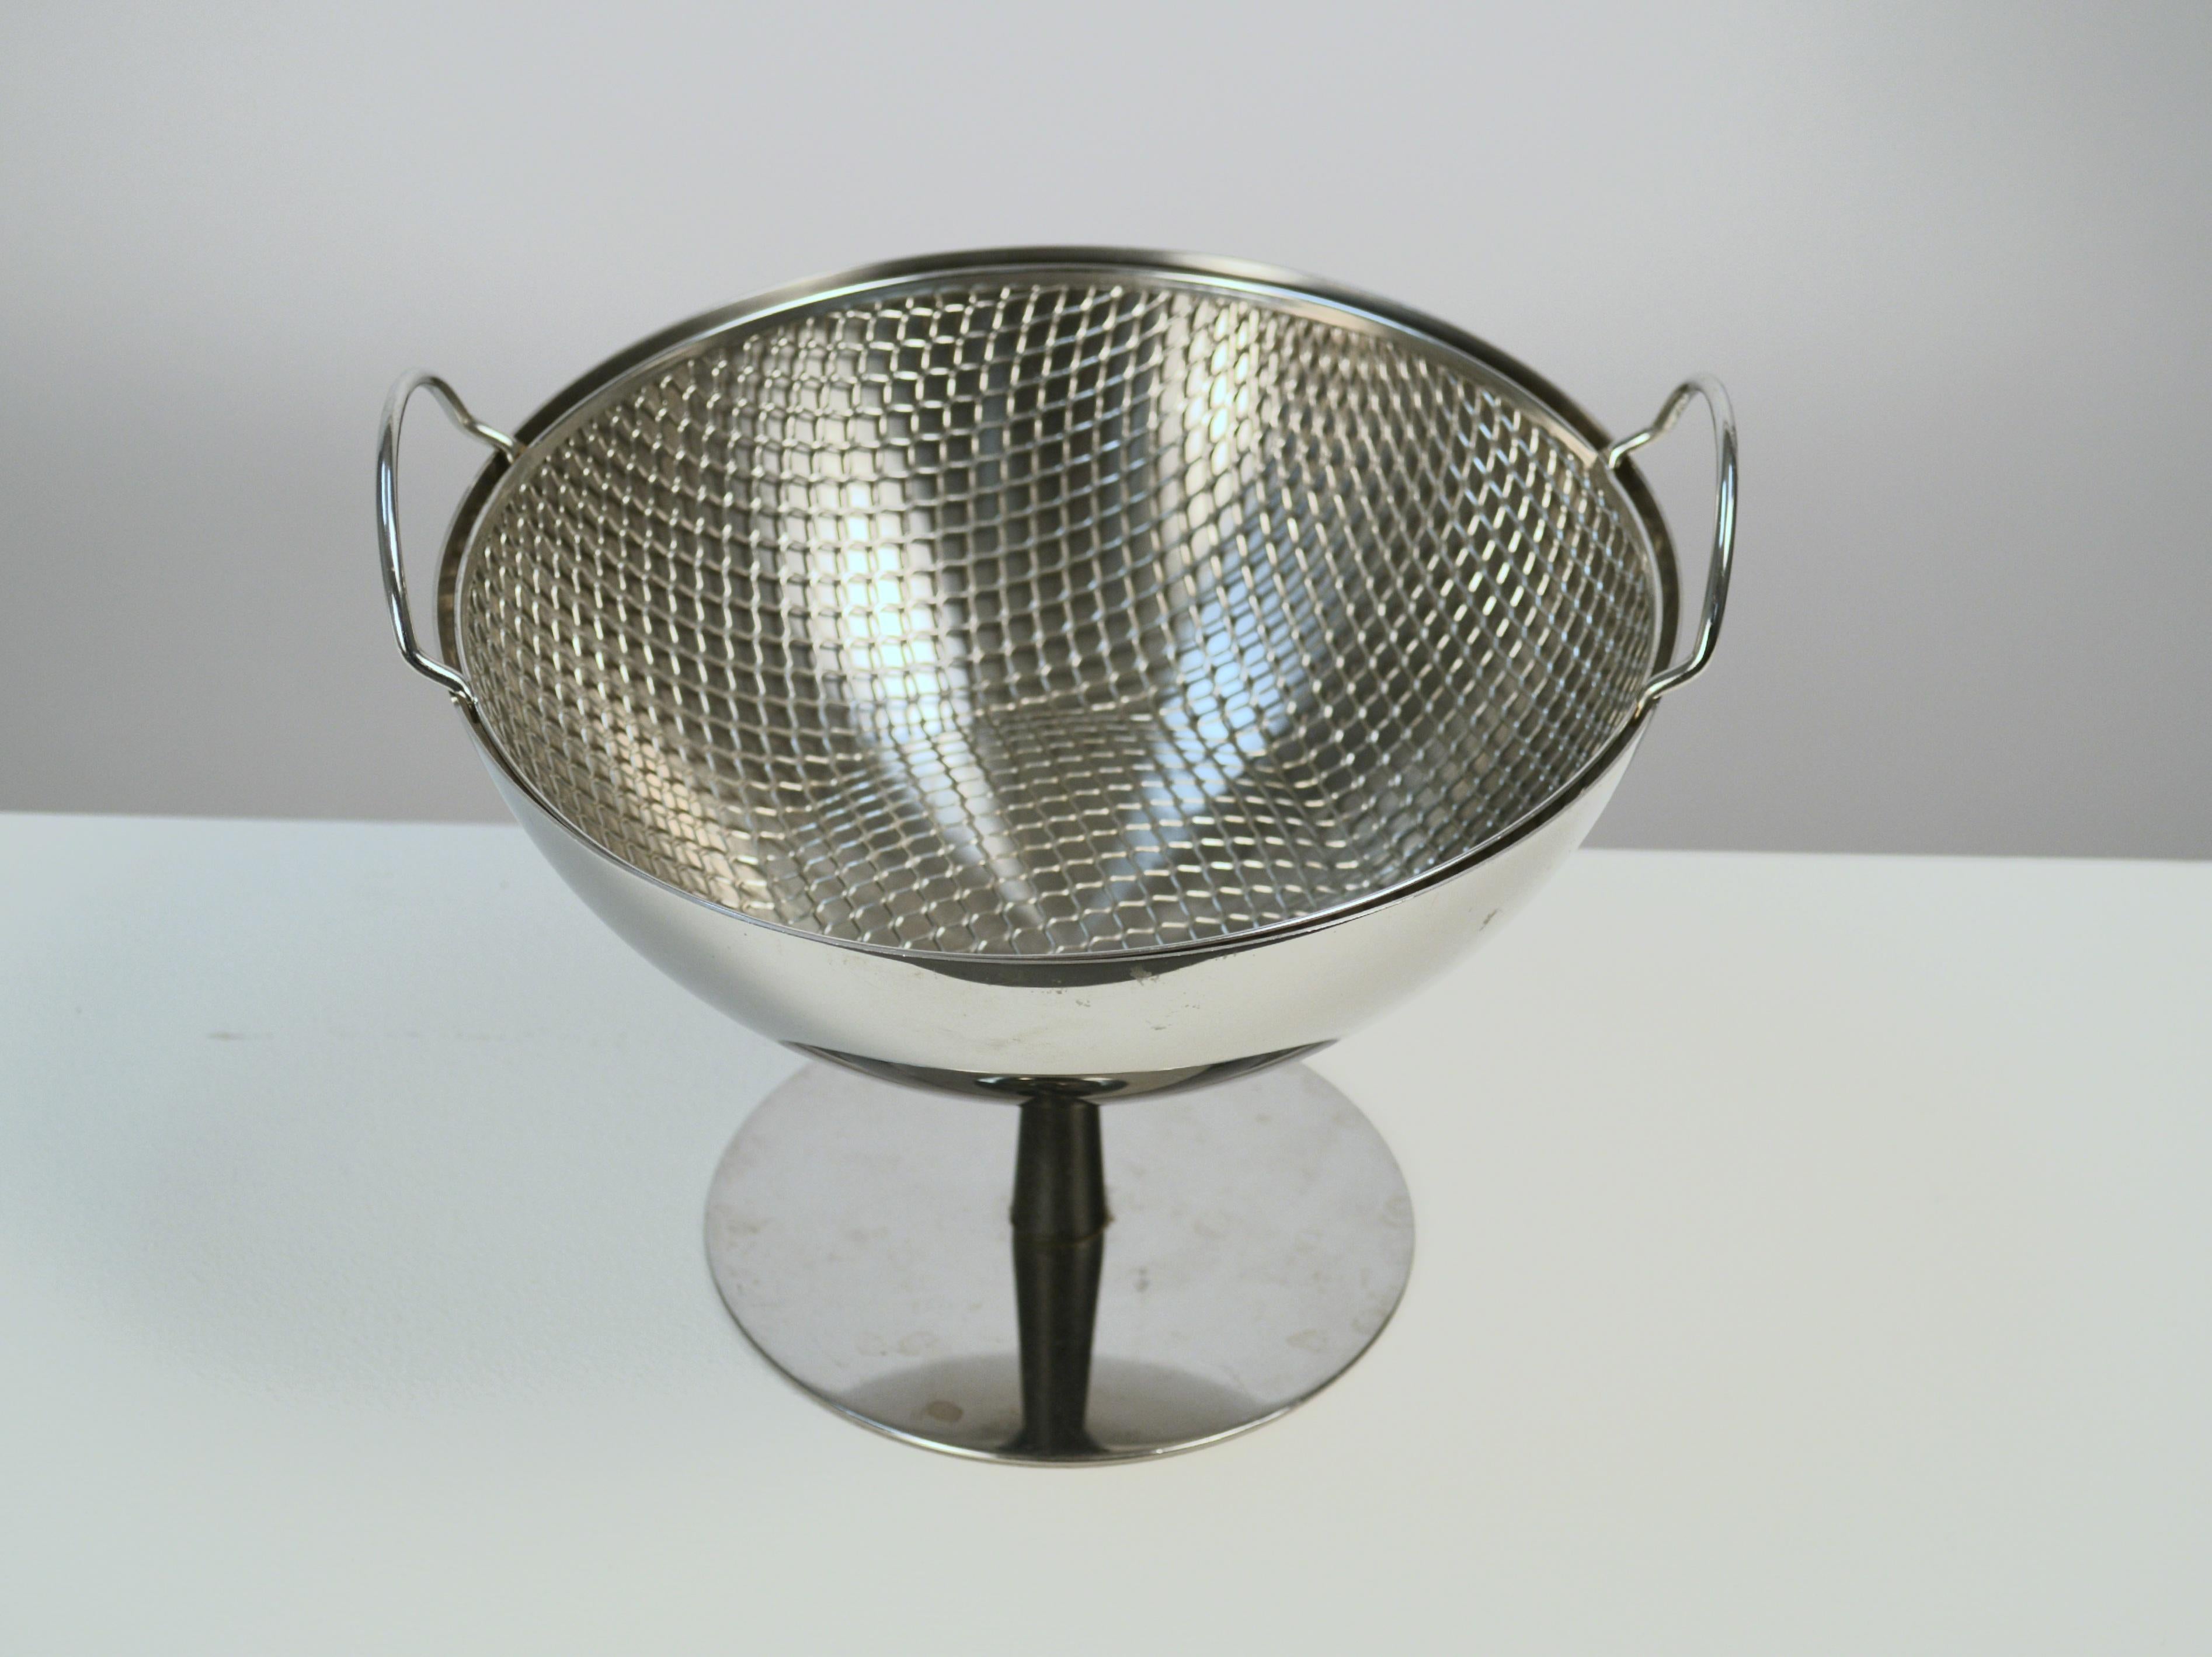 Achille Castiglioni Fruit Bowl with Strainer Designed for Alessi, Italy In Good Condition For Sale In Portland, ME